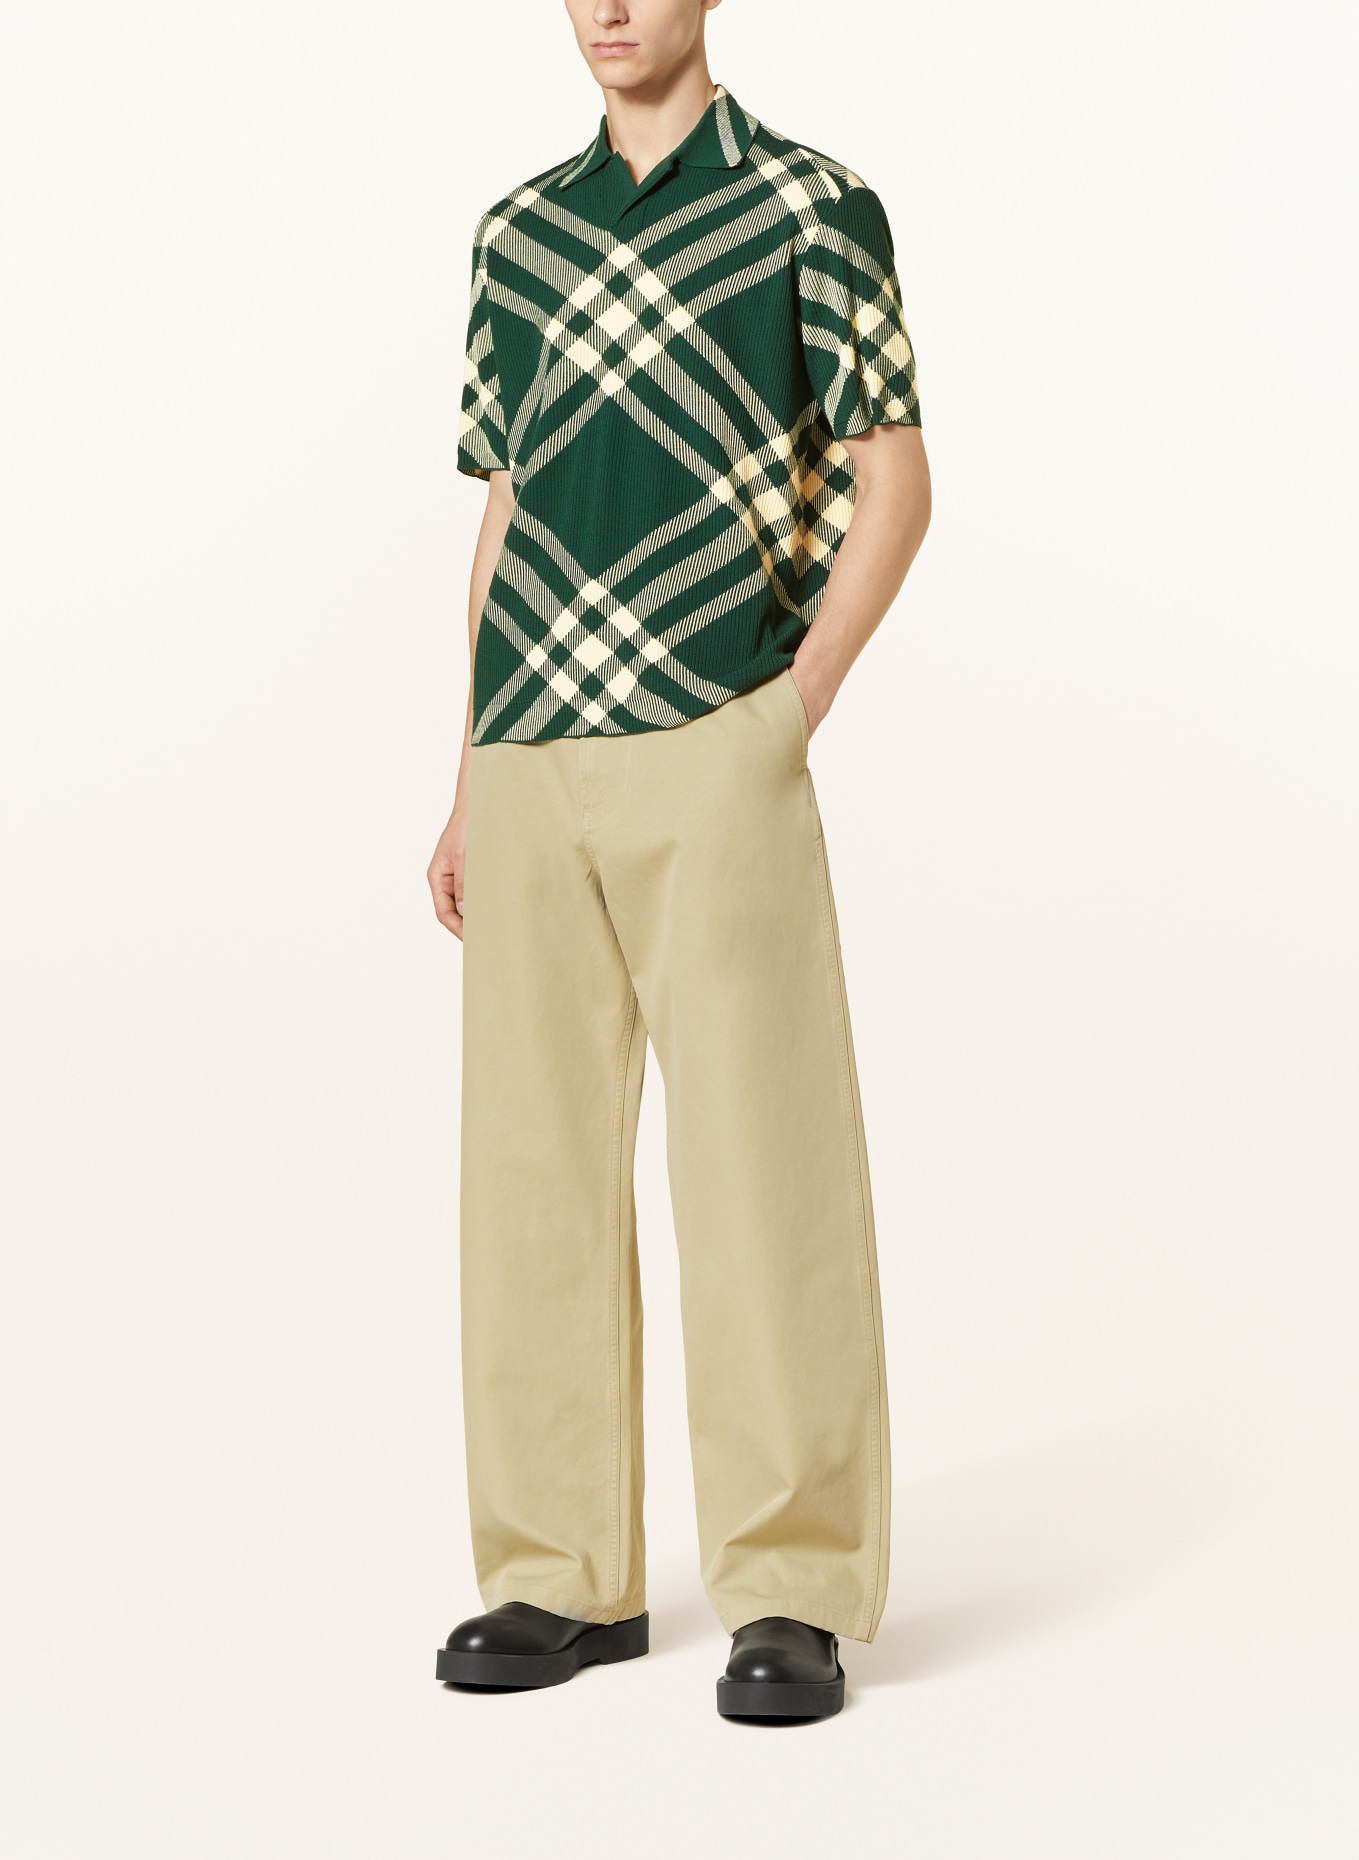 BURBERRY Knitted polo shirt DAFFODIL classic fit, Color: DARK GREEN/ LIGHT YELLOW (Image 2)